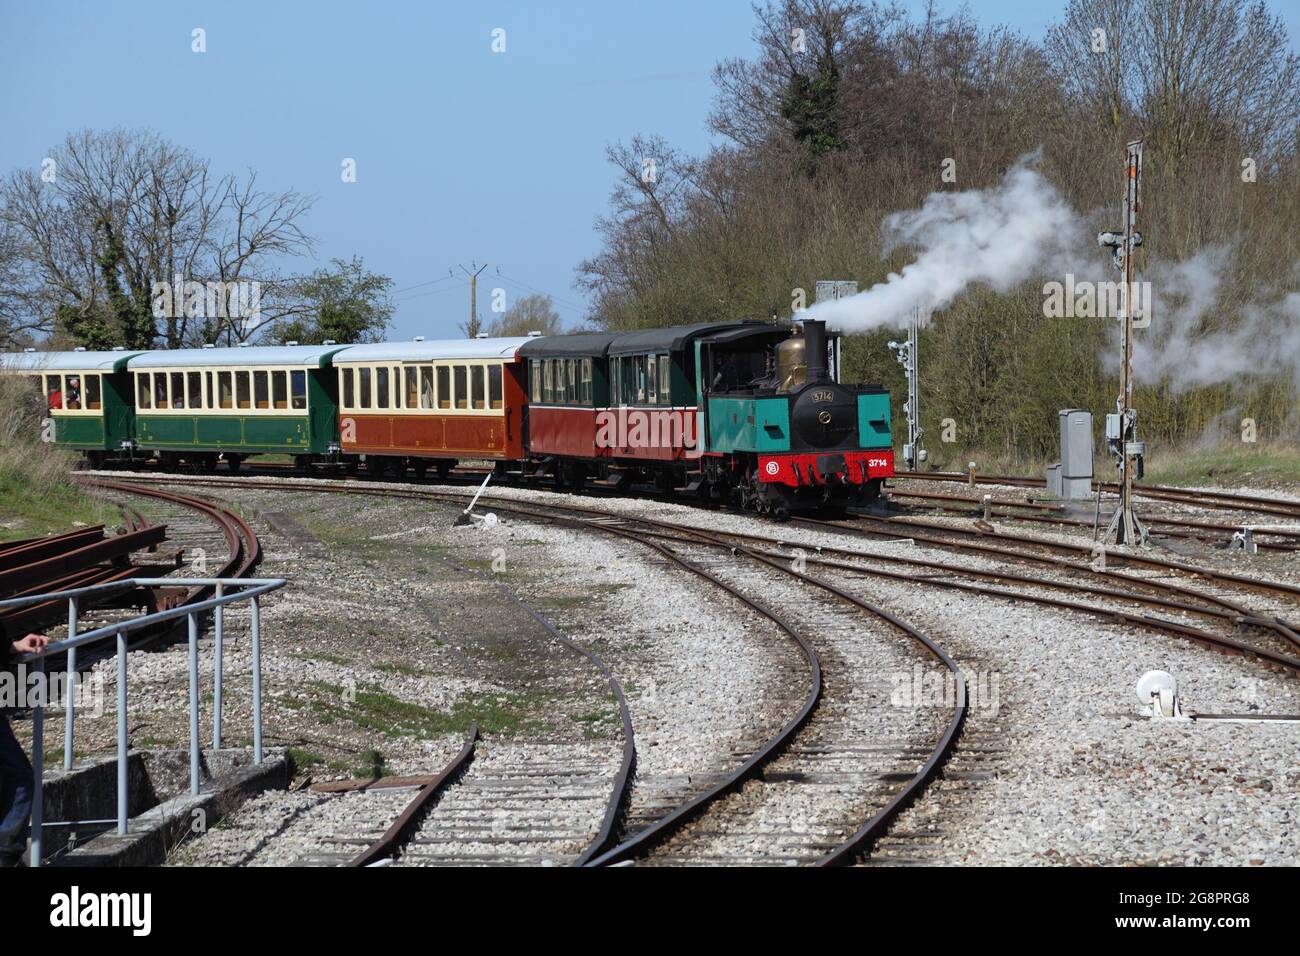 Steam train for tourists approaching Noyelles-sur-Mer, Baie de Somme, Somme, Picardy, France Stock Photo